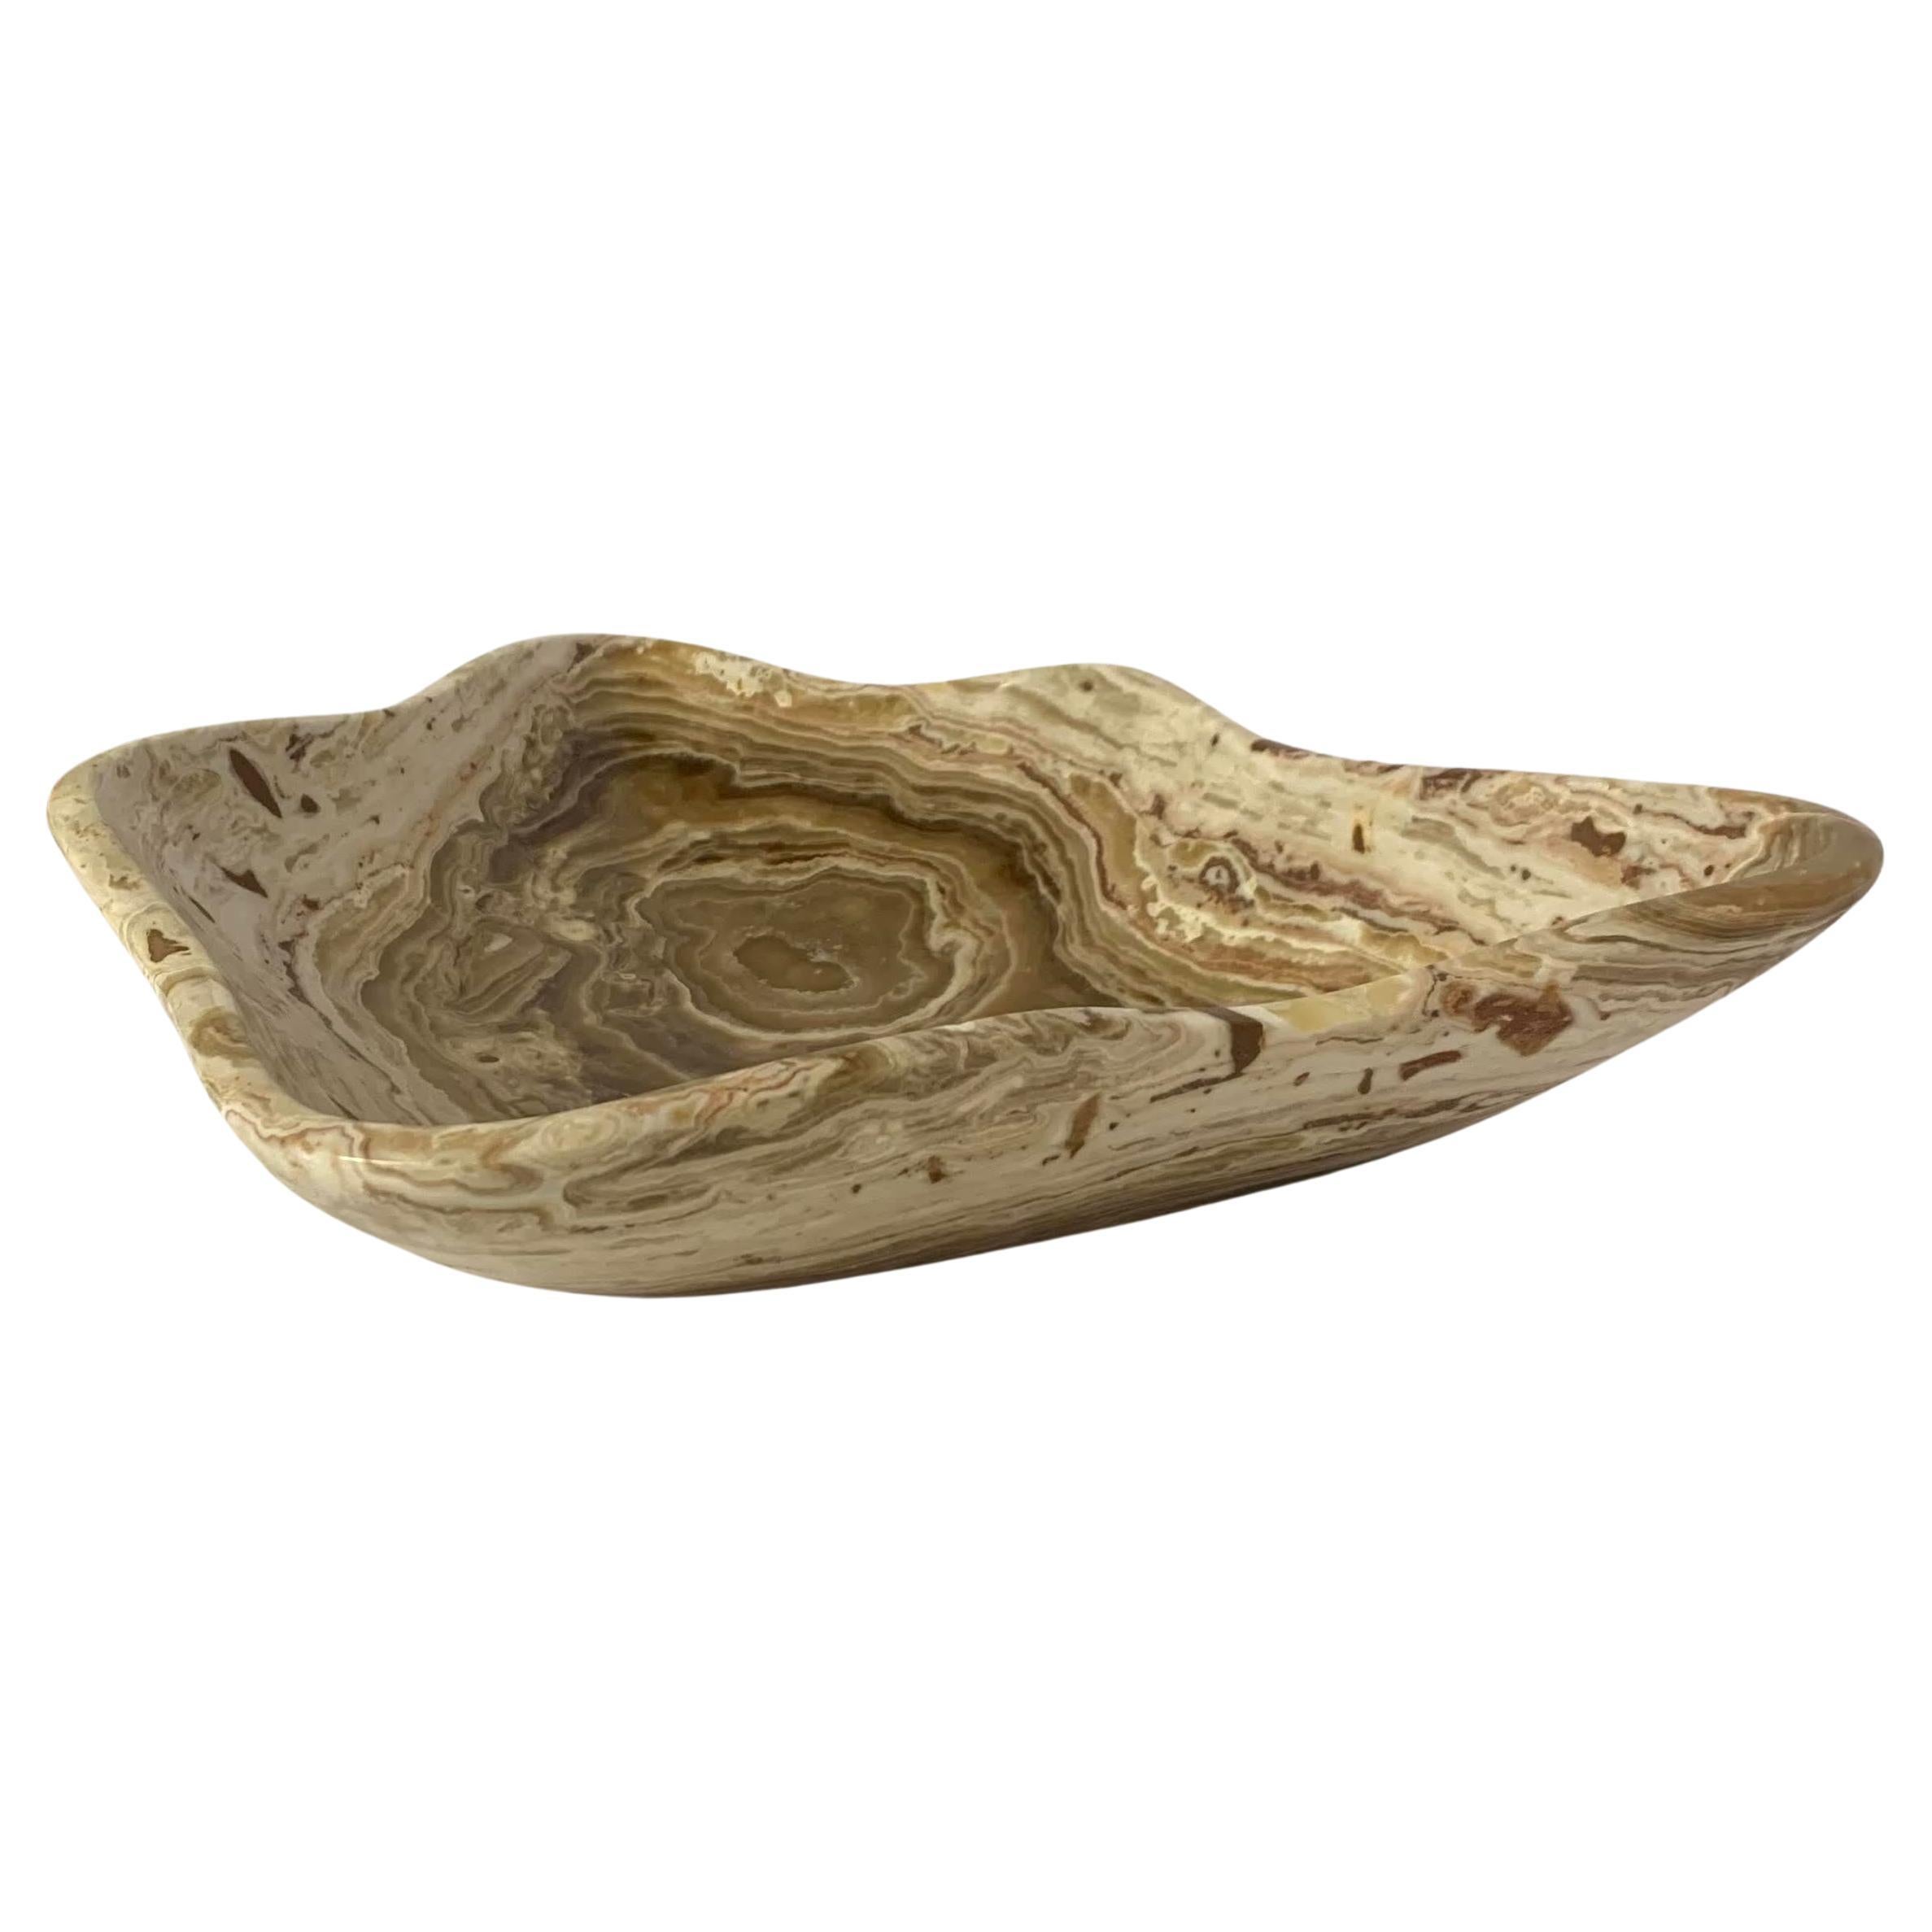 Tan And Cream Free Form Shaped Onyx Bowl, Moroccan, Contemporary